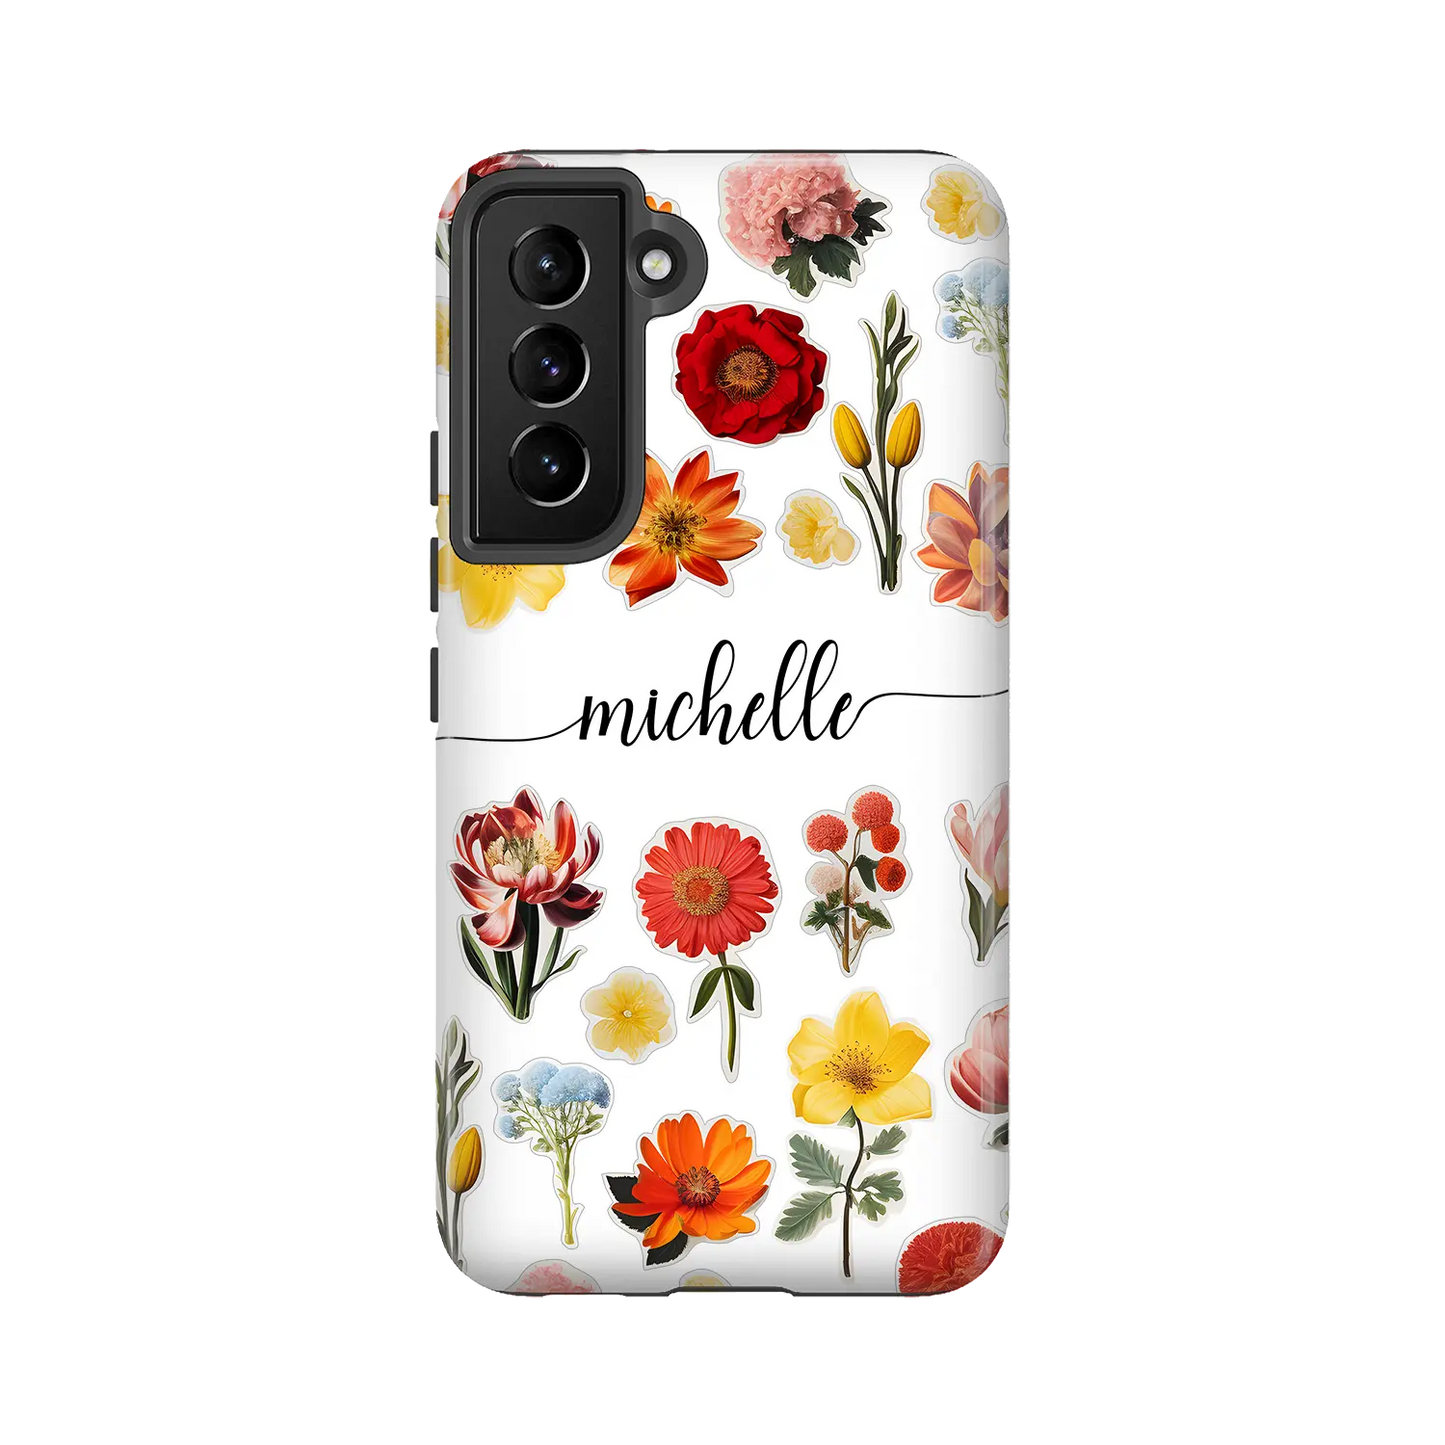 Flower Stickers - Personalised Galaxy S Case